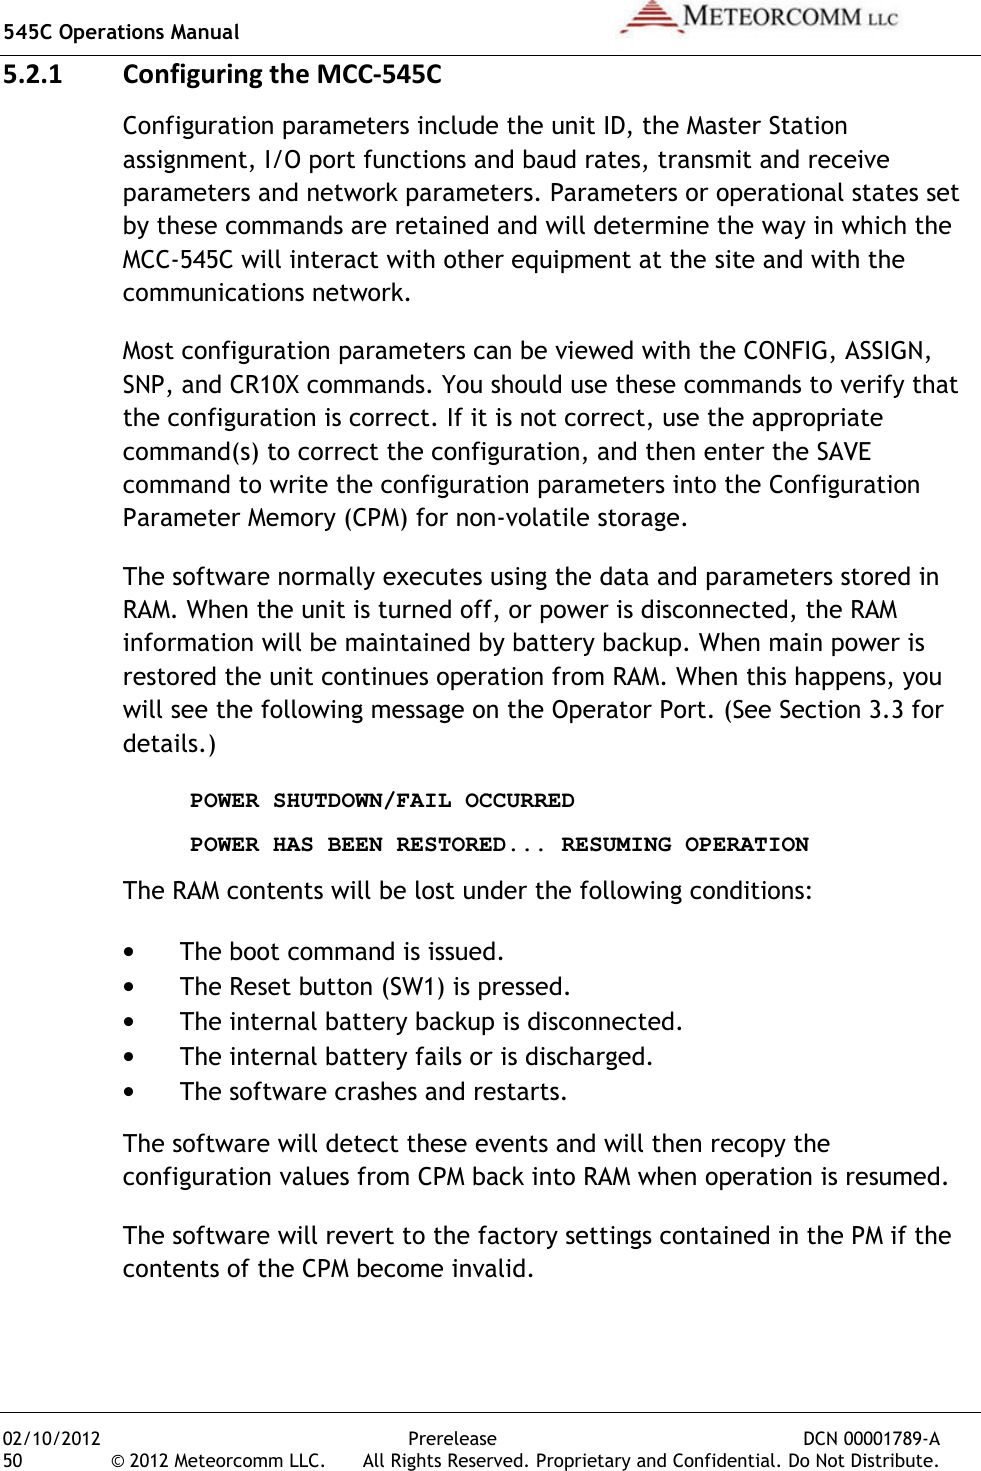 545C Operations Manual   02/10/2012  Prerelease  DCN 00001789-A 50  © 2012 Meteorcomm LLC.   All Rights Reserved. Proprietary and Confidential. Do Not Distribute. 5.2.1 Configuring the MCC-545C Configuration parameters include the unit ID, the Master Station assignment, I/O port functions and baud rates, transmit and receive parameters and network parameters. Parameters or operational states set by these commands are retained and will determine the way in which the MCC-545C will interact with other equipment at the site and with the communications network. Most configuration parameters can be viewed with the CONFIG, ASSIGN, SNP, and CR10X commands. You should use these commands to verify that the configuration is correct. If it is not correct, use the appropriate command(s) to correct the configuration, and then enter the SAVE command to write the configuration parameters into the Configuration Parameter Memory (CPM) for non-volatile storage. The software normally executes using the data and parameters stored in RAM. When the unit is turned off, or power is disconnected, the RAM information will be maintained by battery backup. When main power is restored the unit continues operation from RAM. When this happens, you will see the following message on the Operator Port. (See Section 3.3 for details.)  POWER SHUTDOWN/FAIL OCCURRED   POWER HAS BEEN RESTORED... RESUMING OPERATION The RAM contents will be lost under the following conditions: • The boot command is issued. • The Reset button (SW1) is pressed. • The internal battery backup is disconnected. • The internal battery fails or is discharged. • The software crashes and restarts. The software will detect these events and will then recopy the configuration values from CPM back into RAM when operation is resumed.  The software will revert to the factory settings contained in the PM if the contents of the CPM become invalid.  